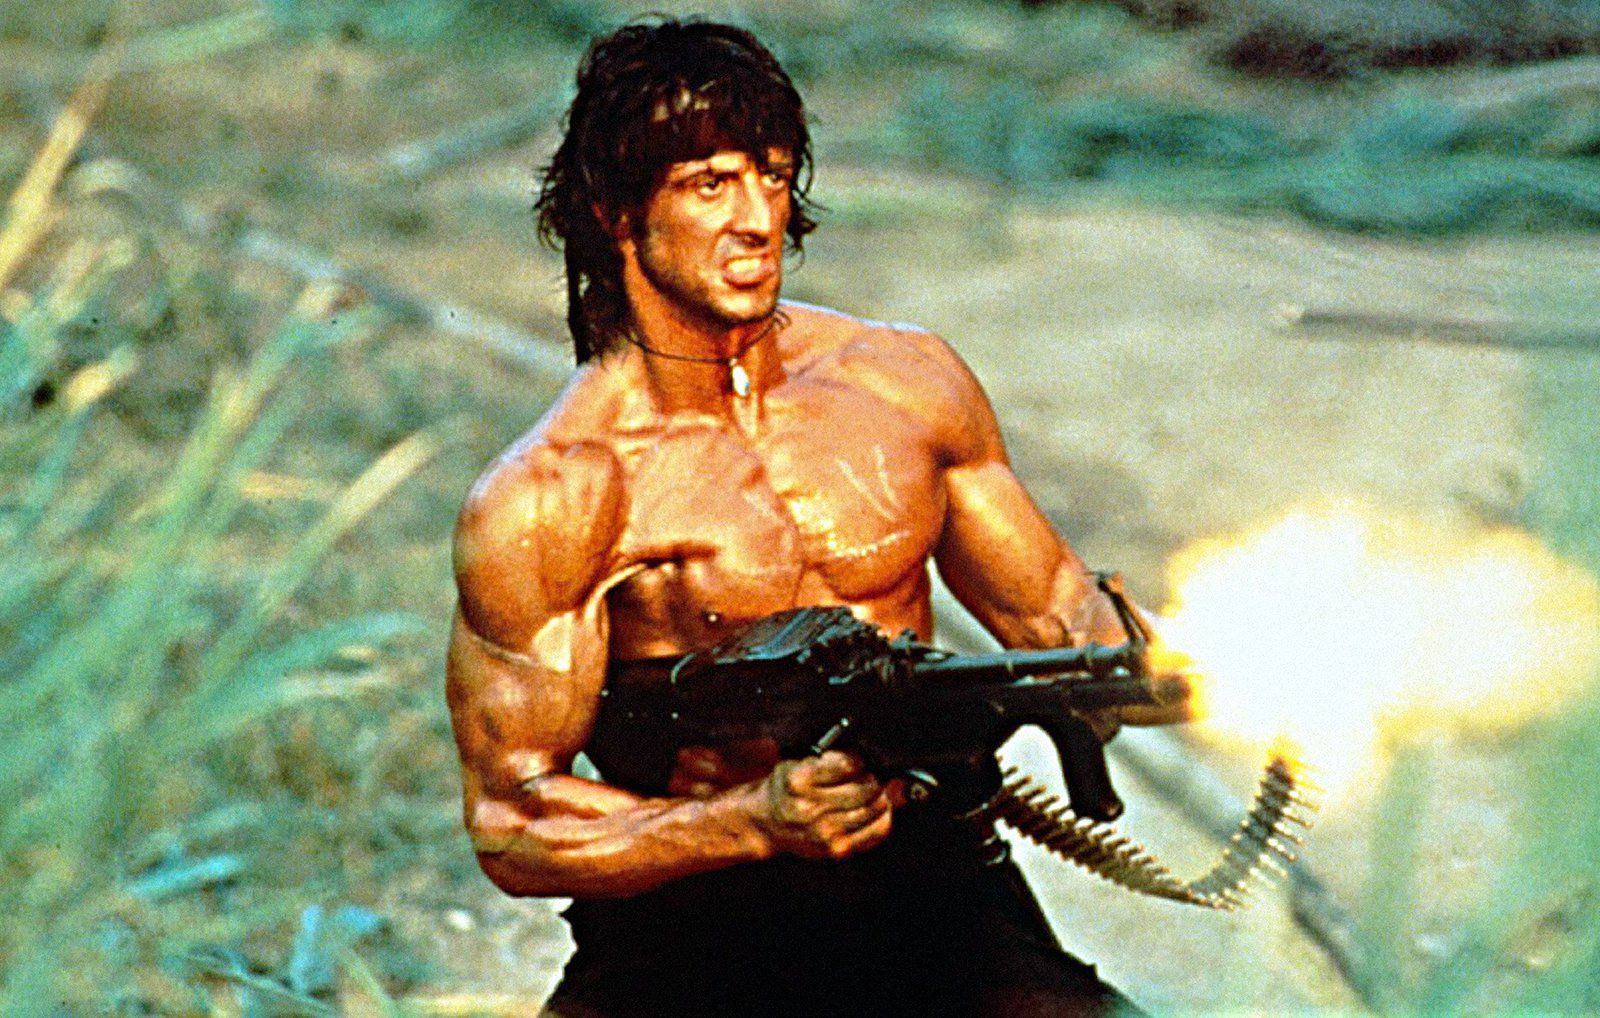 Image result for rambo